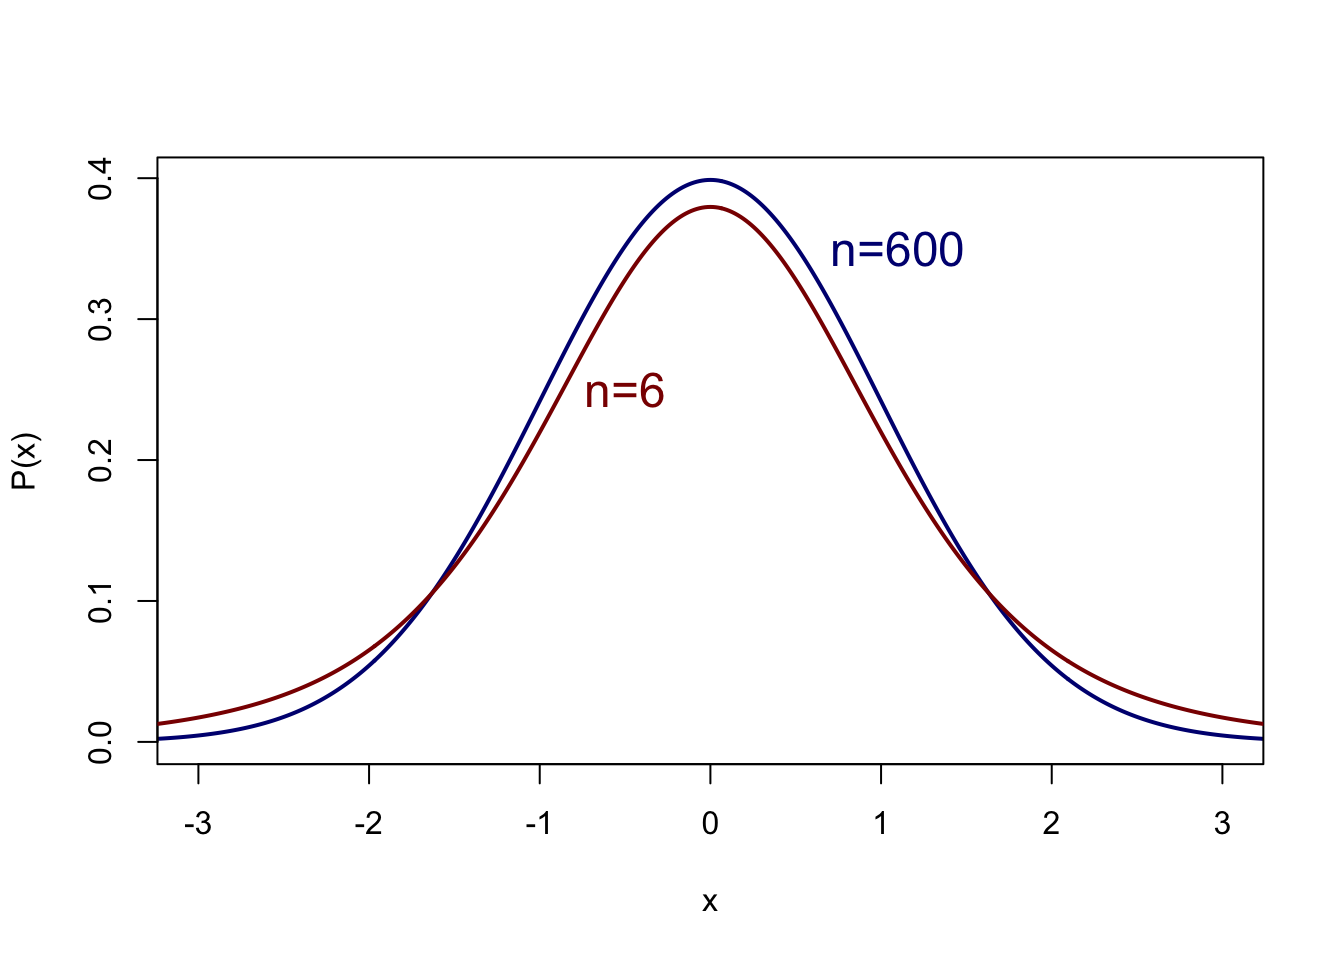 Probability distribution according to the t-distribution of a variable $x$ with mean 0 and standard deviation 1, for n=600 and n=6.